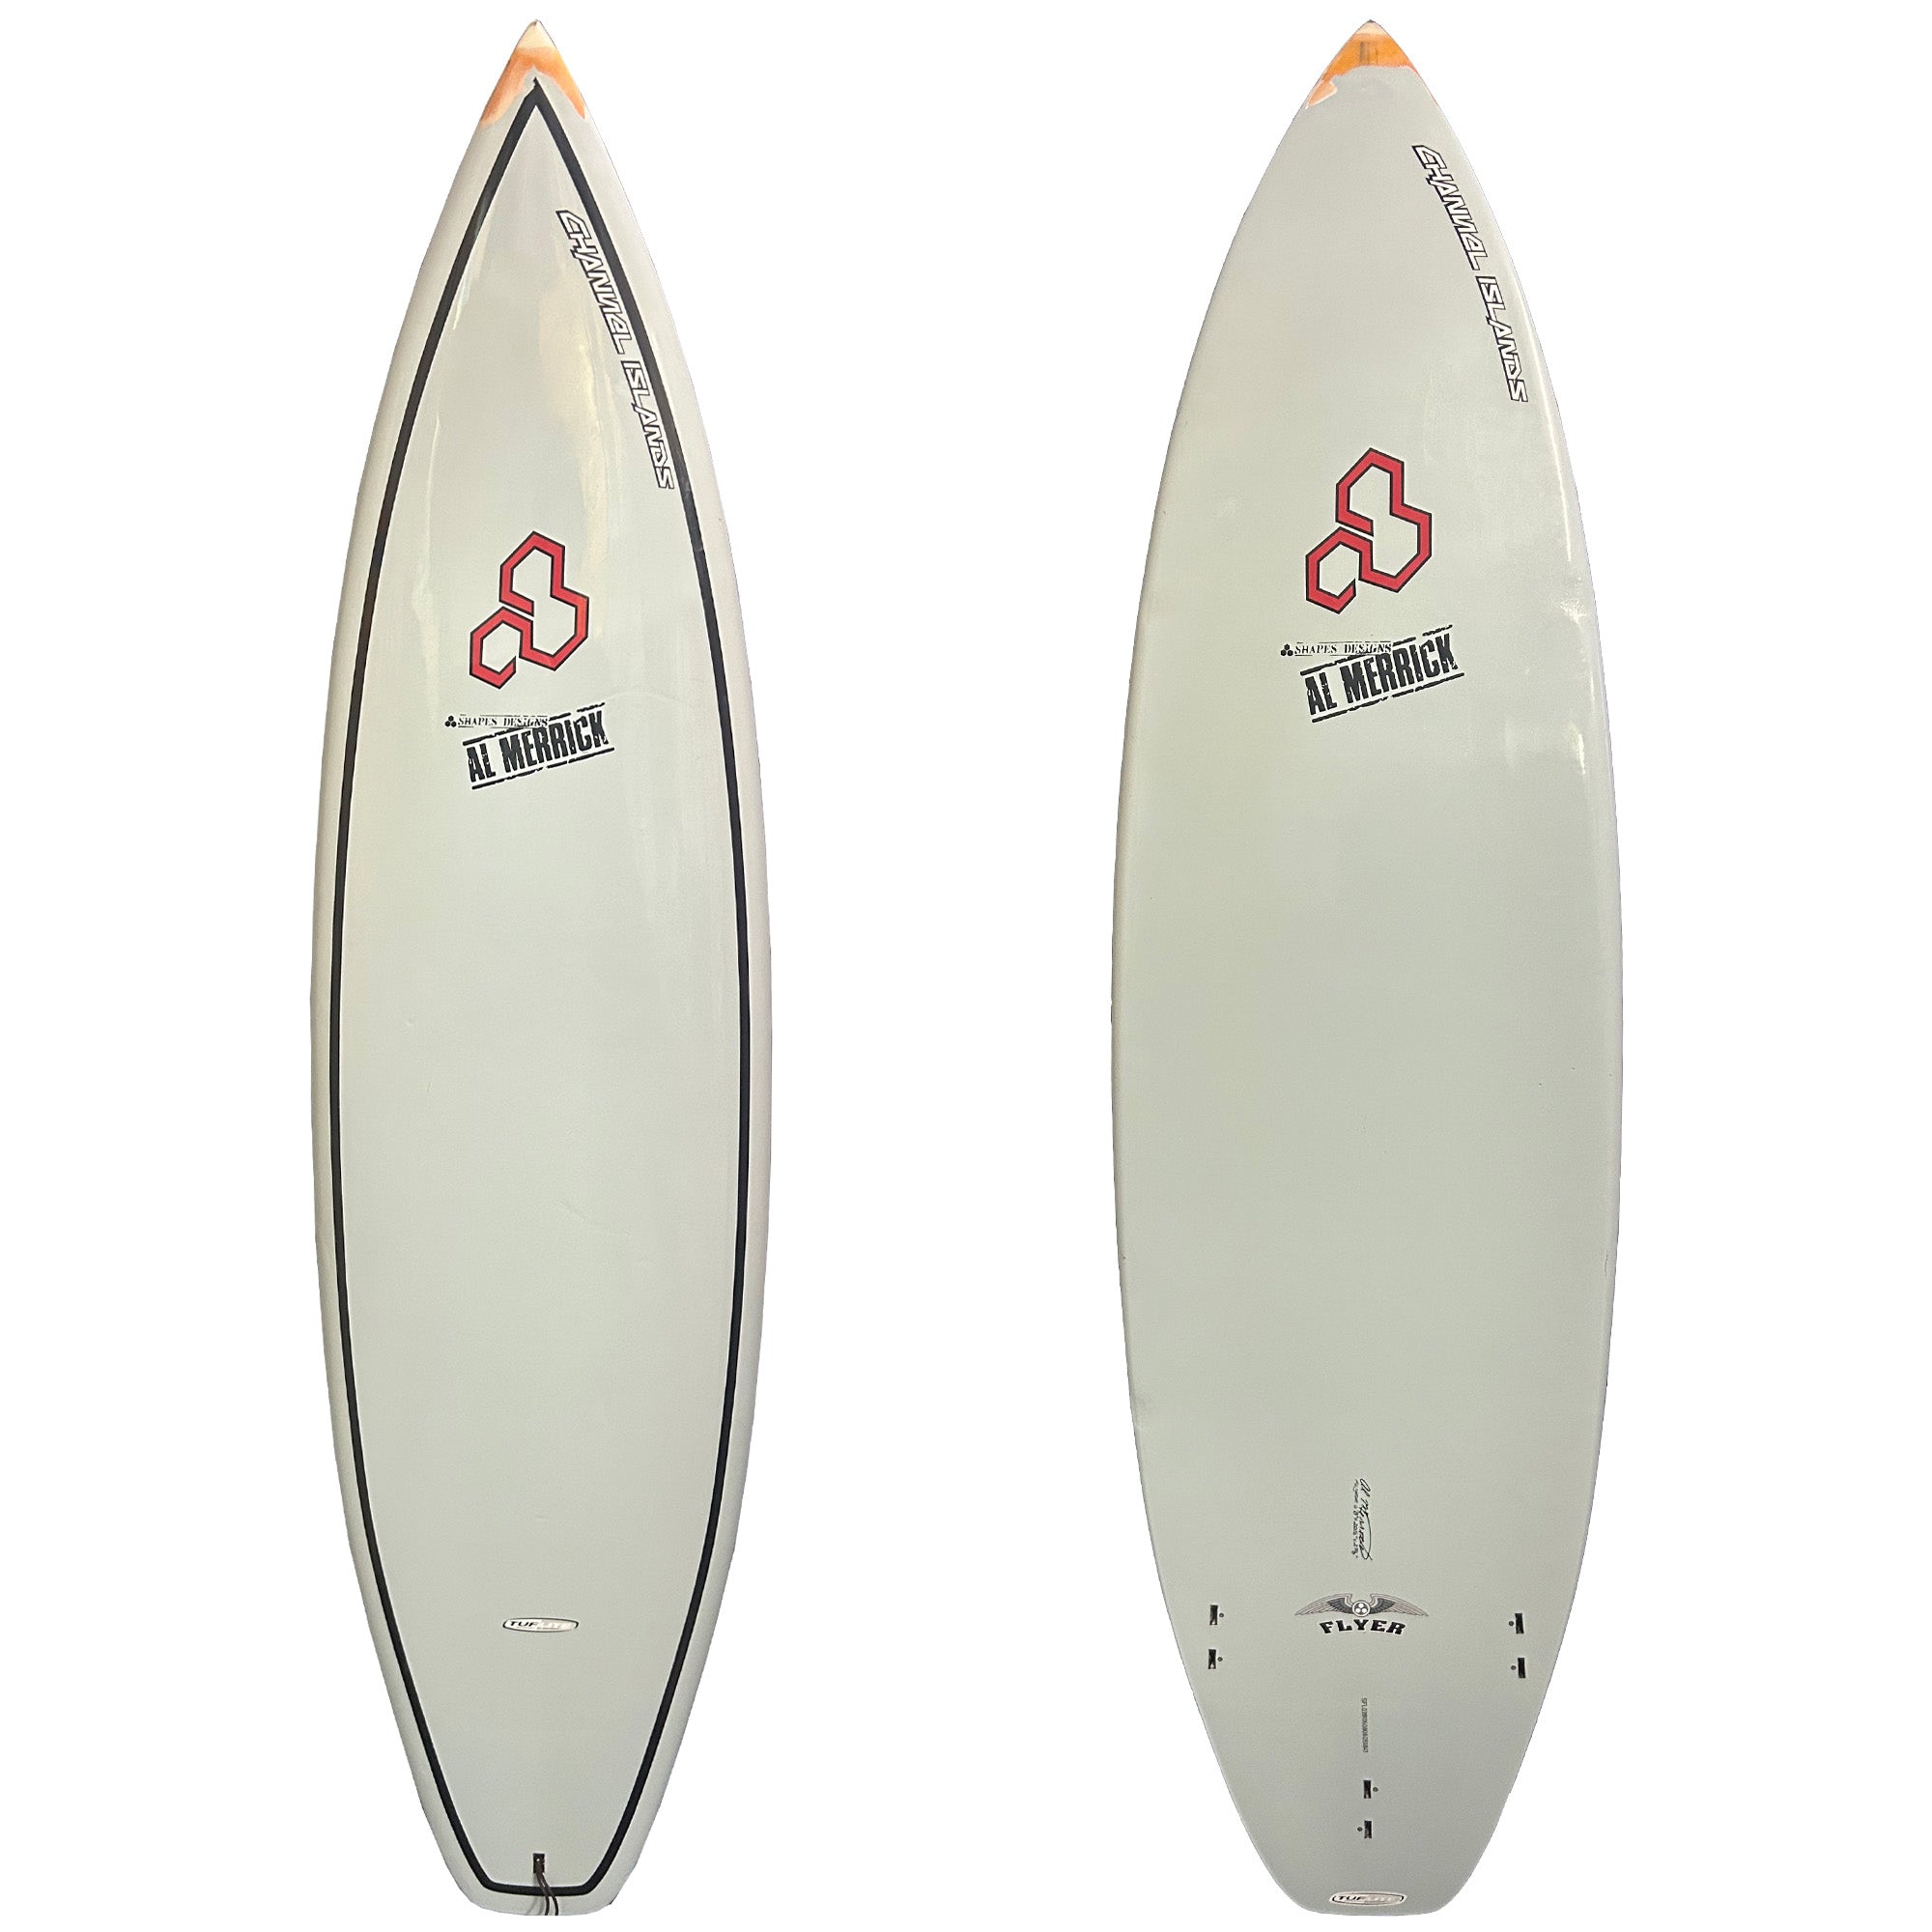 Channel Islands Flyer 6'8 Consignment Surfboard